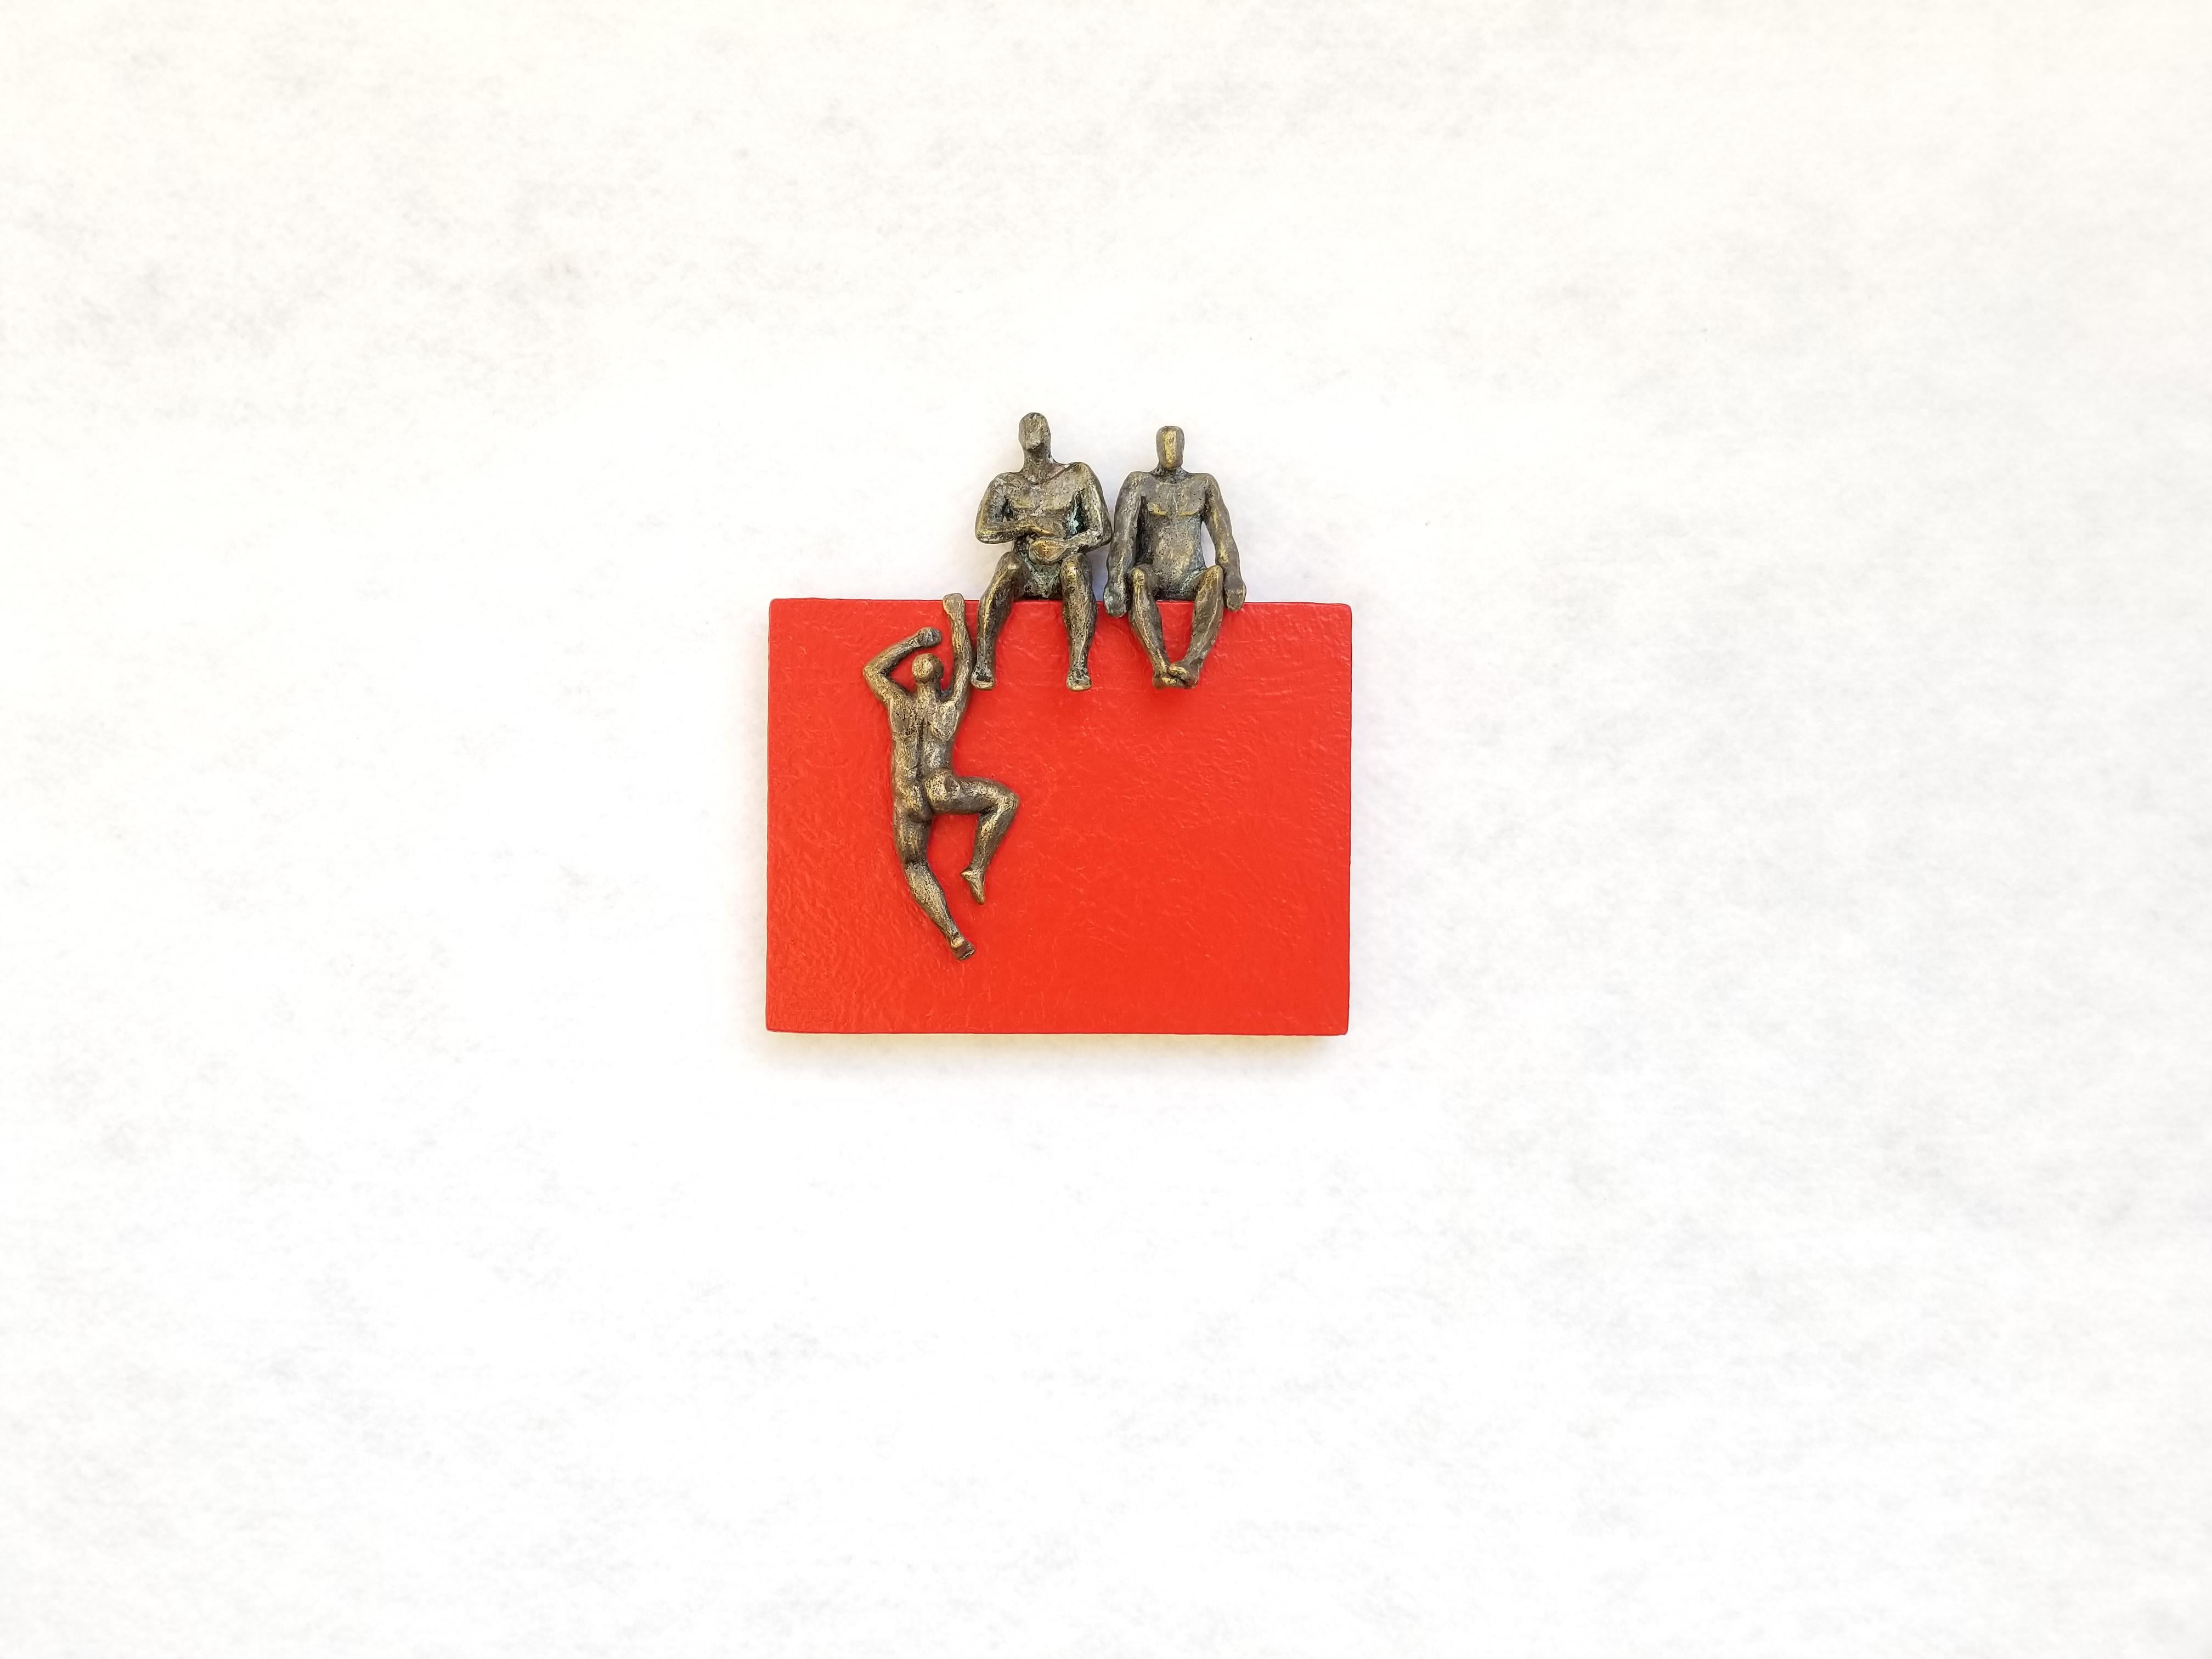 <p>Artist Comments<br>Two figures sit and wait for their companion climbing the ledge of a red rectangular structure. Artist Yelitza Diaz seeks to question the basic idea of minimalism by adding the human form to the composition. An experimental